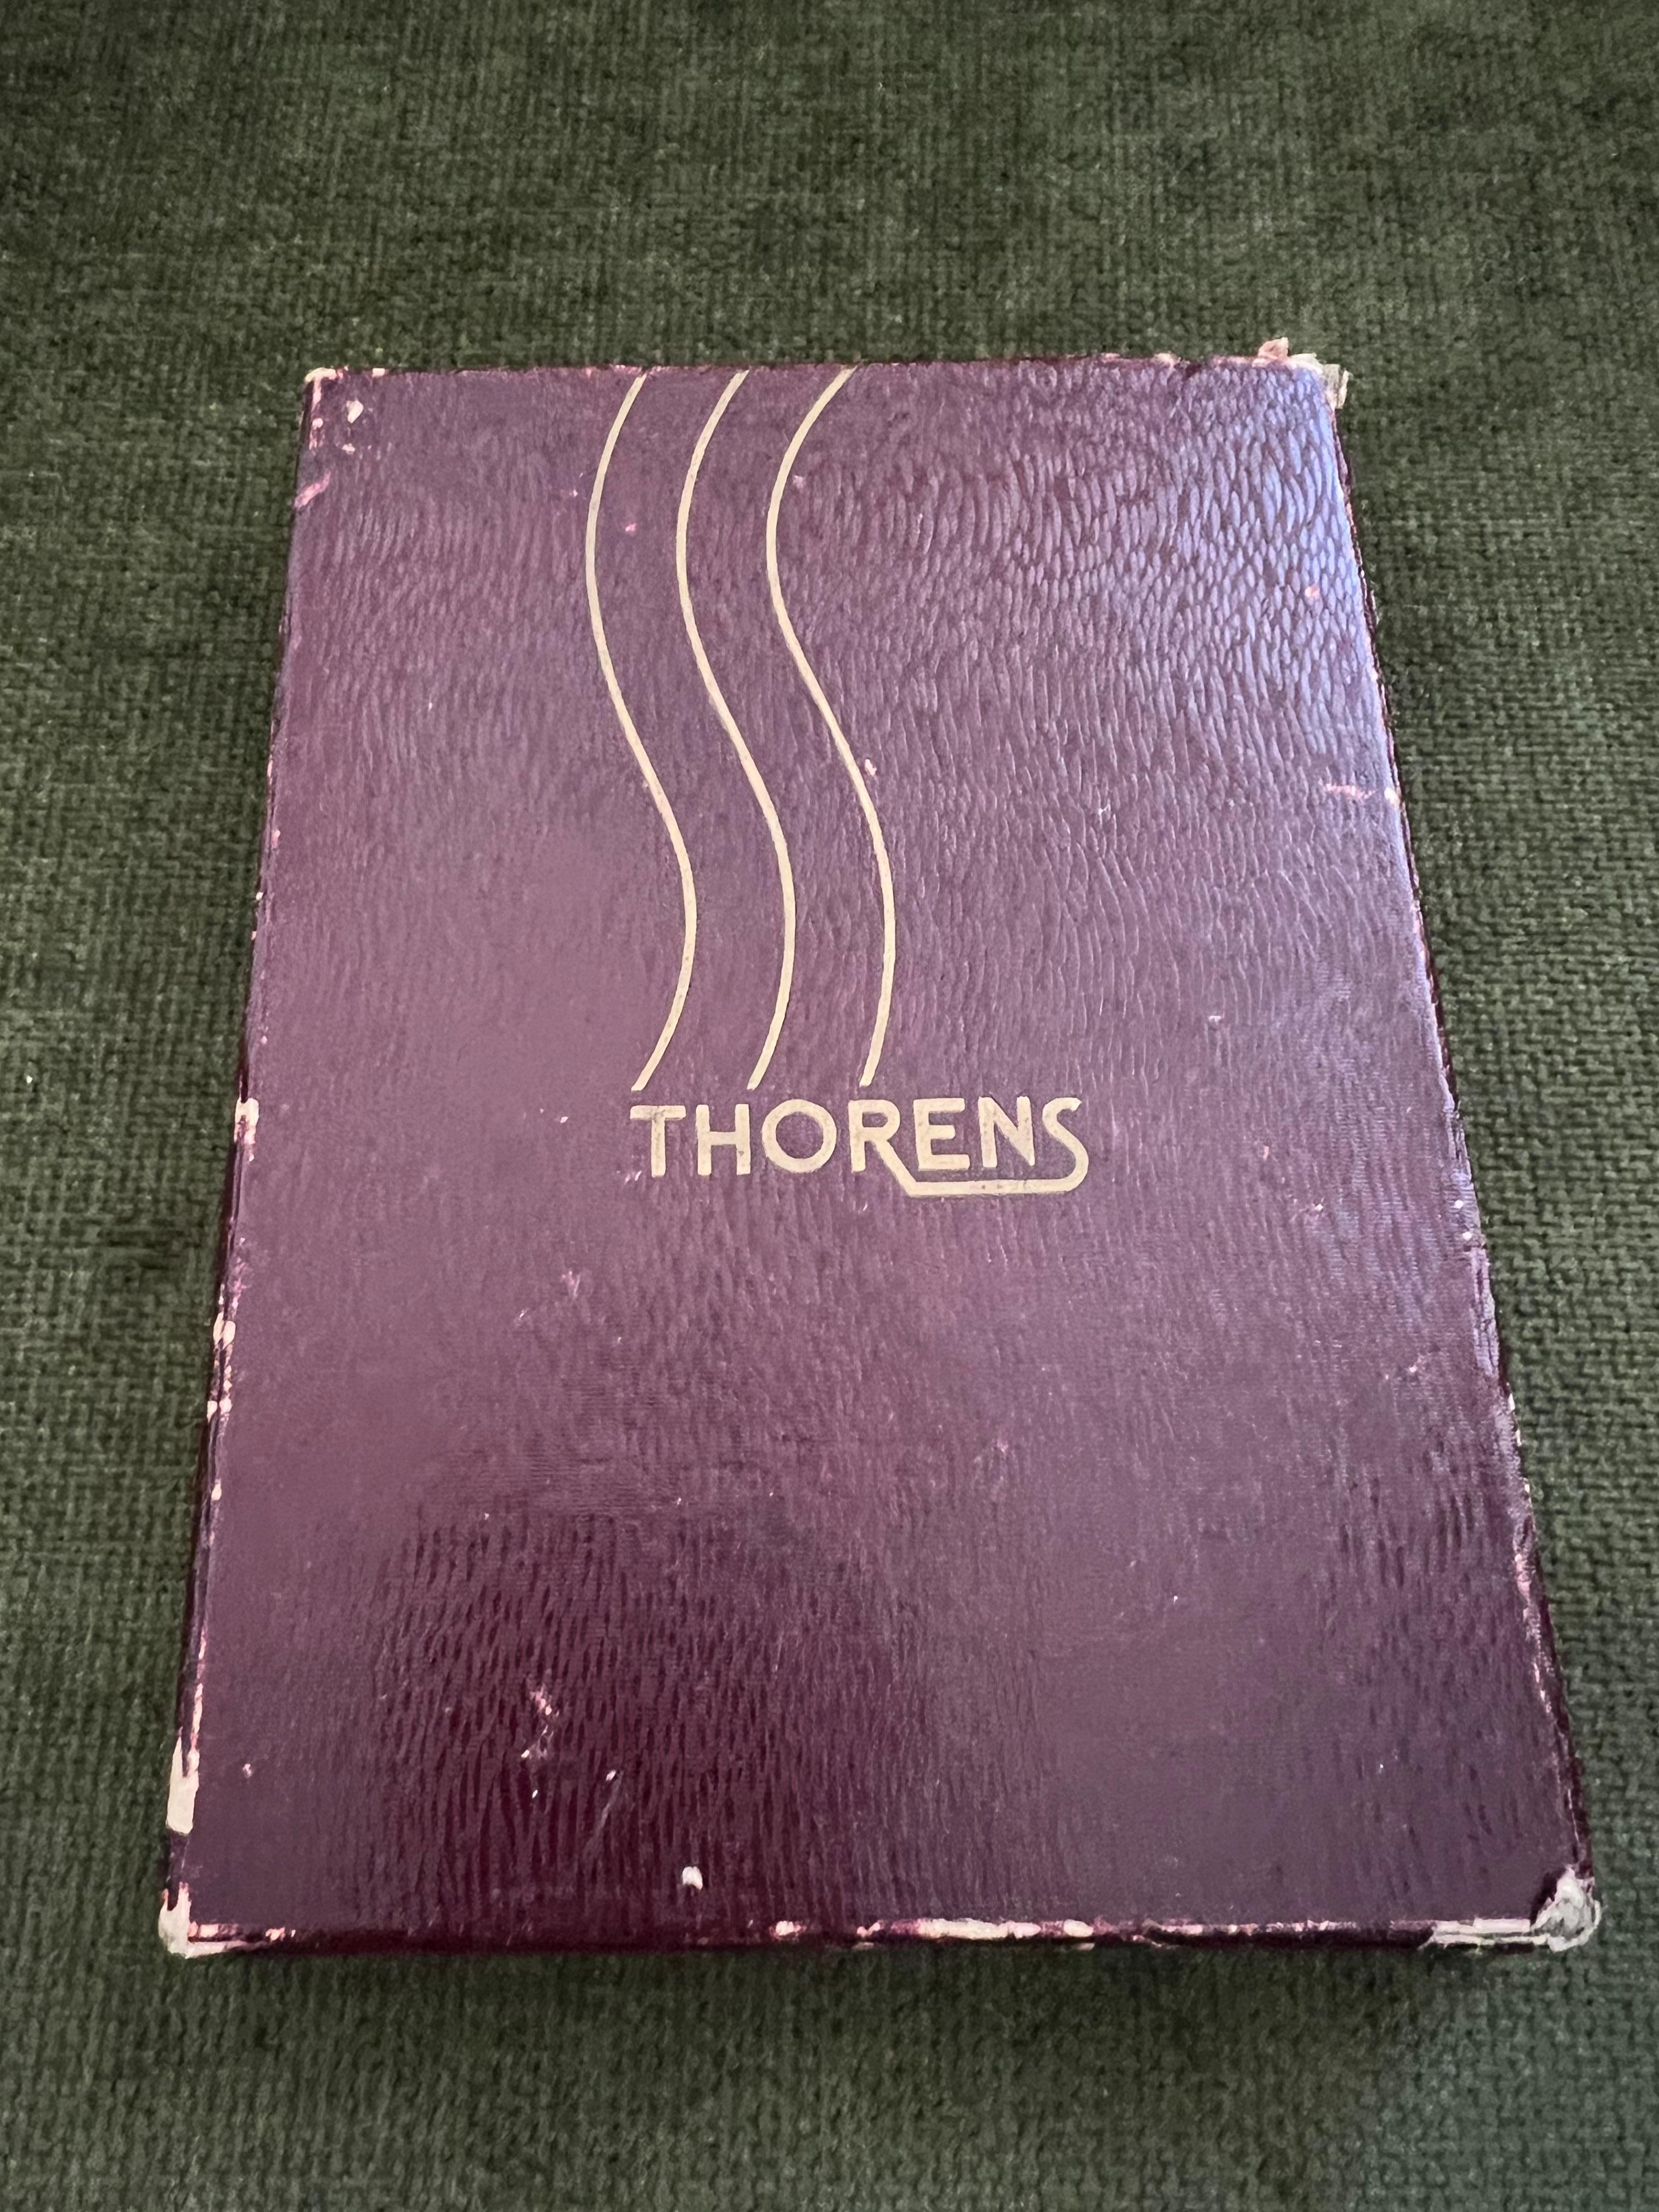 1950s Thorens Cigarette Case & Lighter
Vintage 1950s Thorens Cigarette Case and Lighter
WORKING CONDITION IN ORIGINAL BOX 
RARE 1950's Thorens
Gold Tone
Open the case, take a cigarette and then close and Lighter pops up and Ignites.
(See video)
The